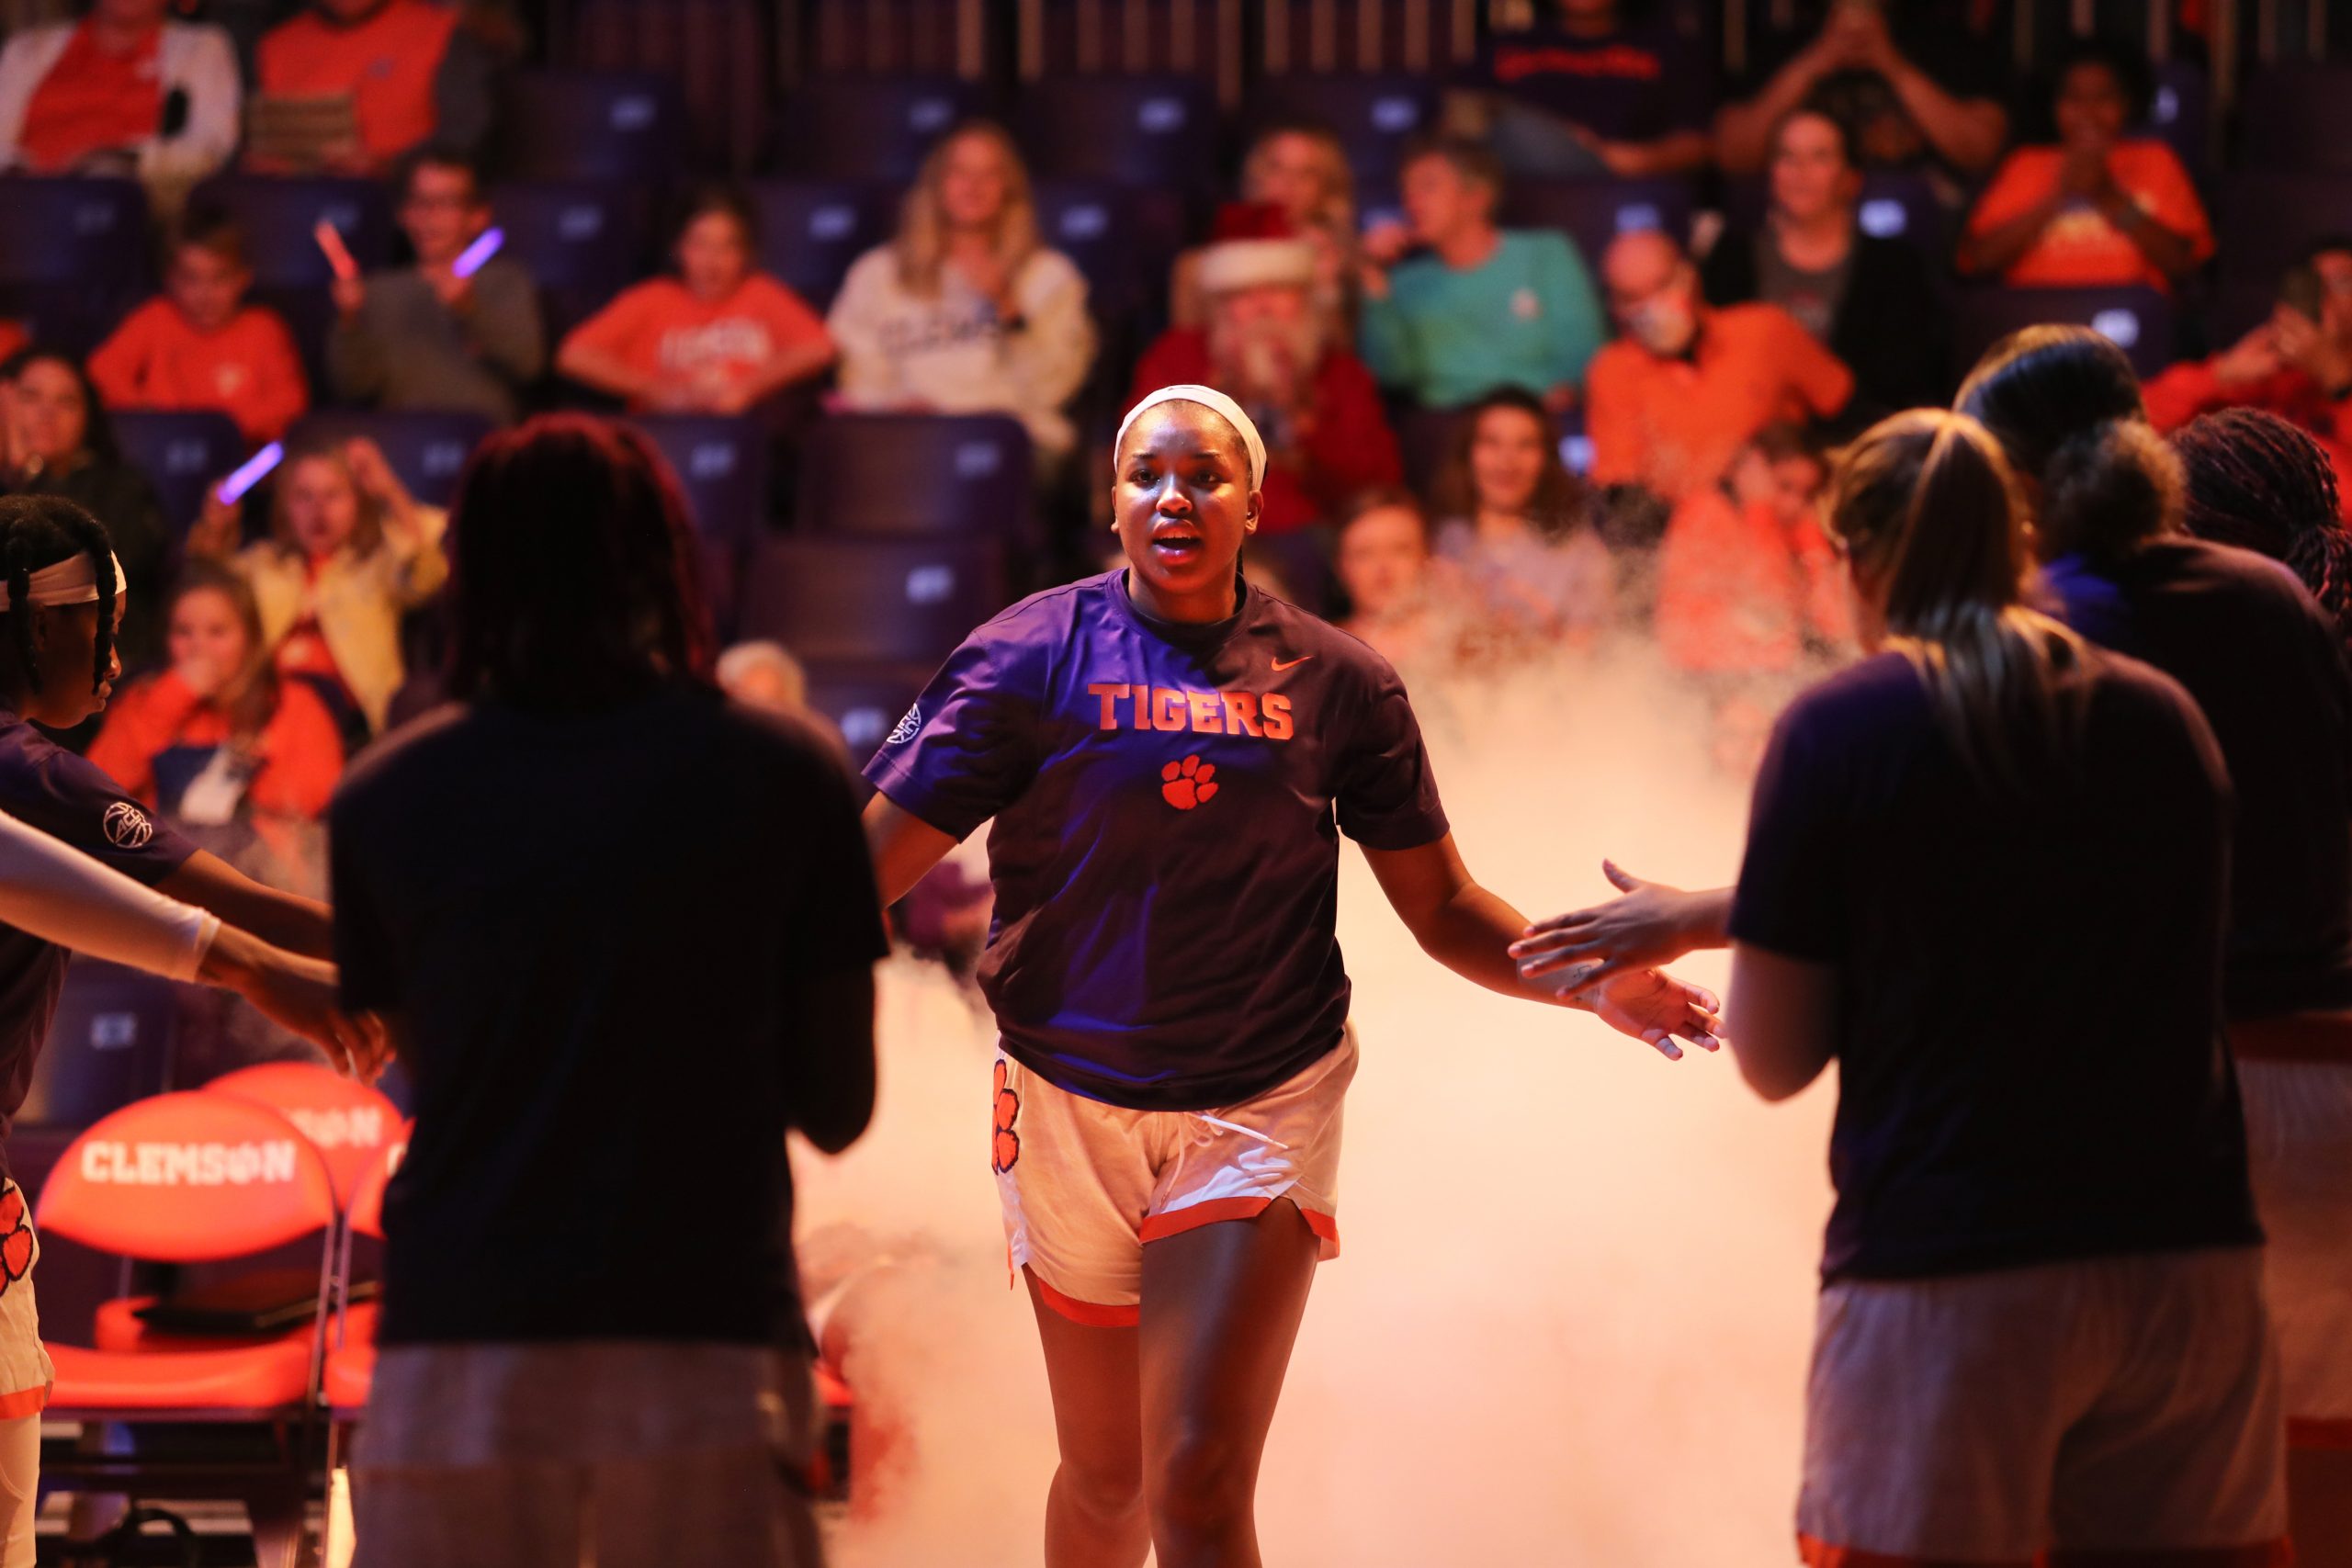 Clemson women’s basketball player Amari Robinson supports Clemson LIFE, a program that provides a university experience for men and women with intellectual disabilities. Photography courtesy of Clemson Athletics